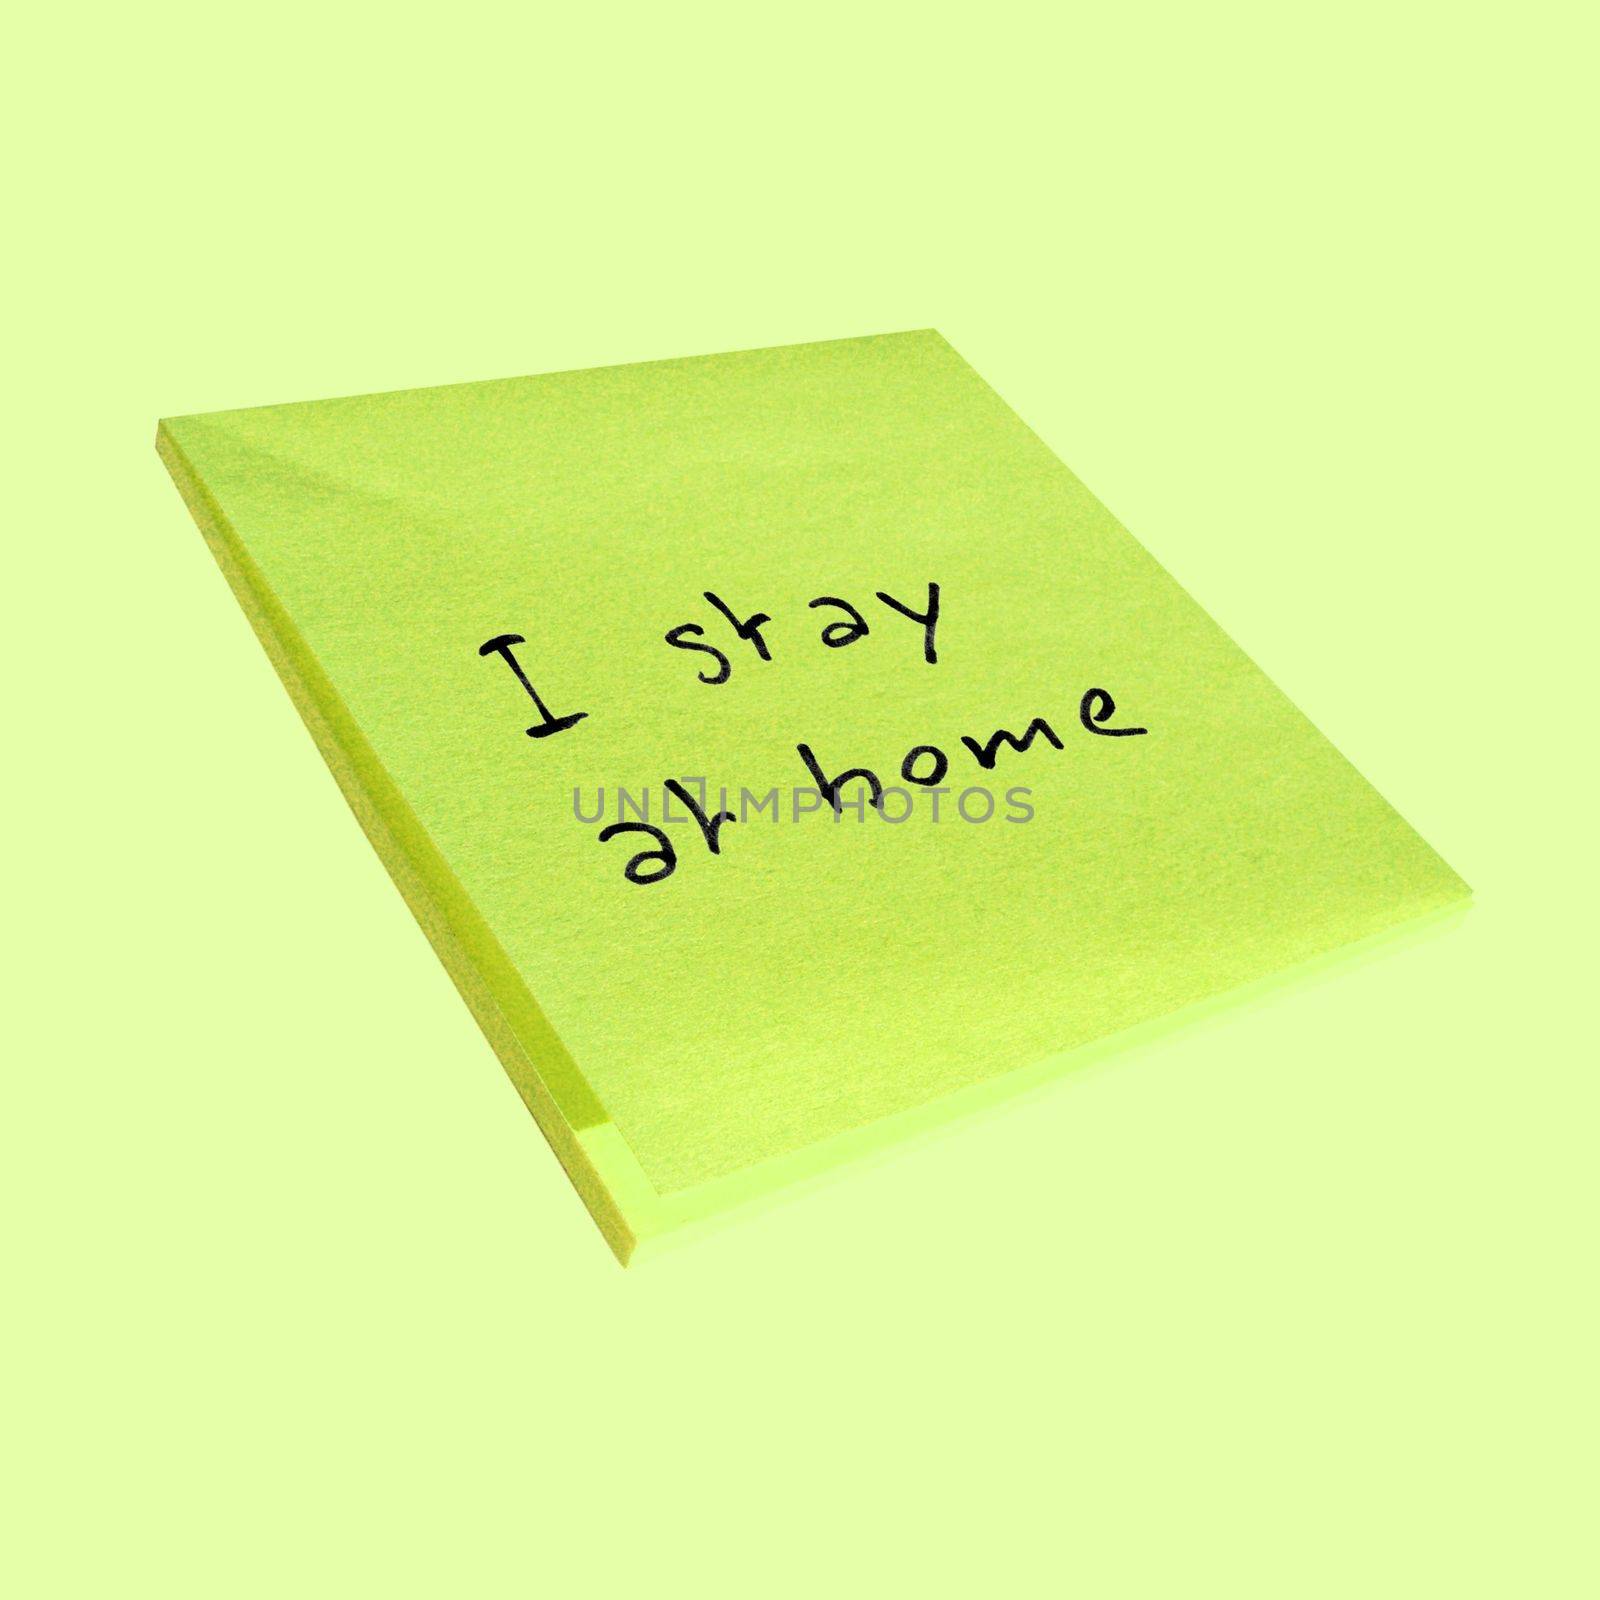 I stay at home sticky note isolated